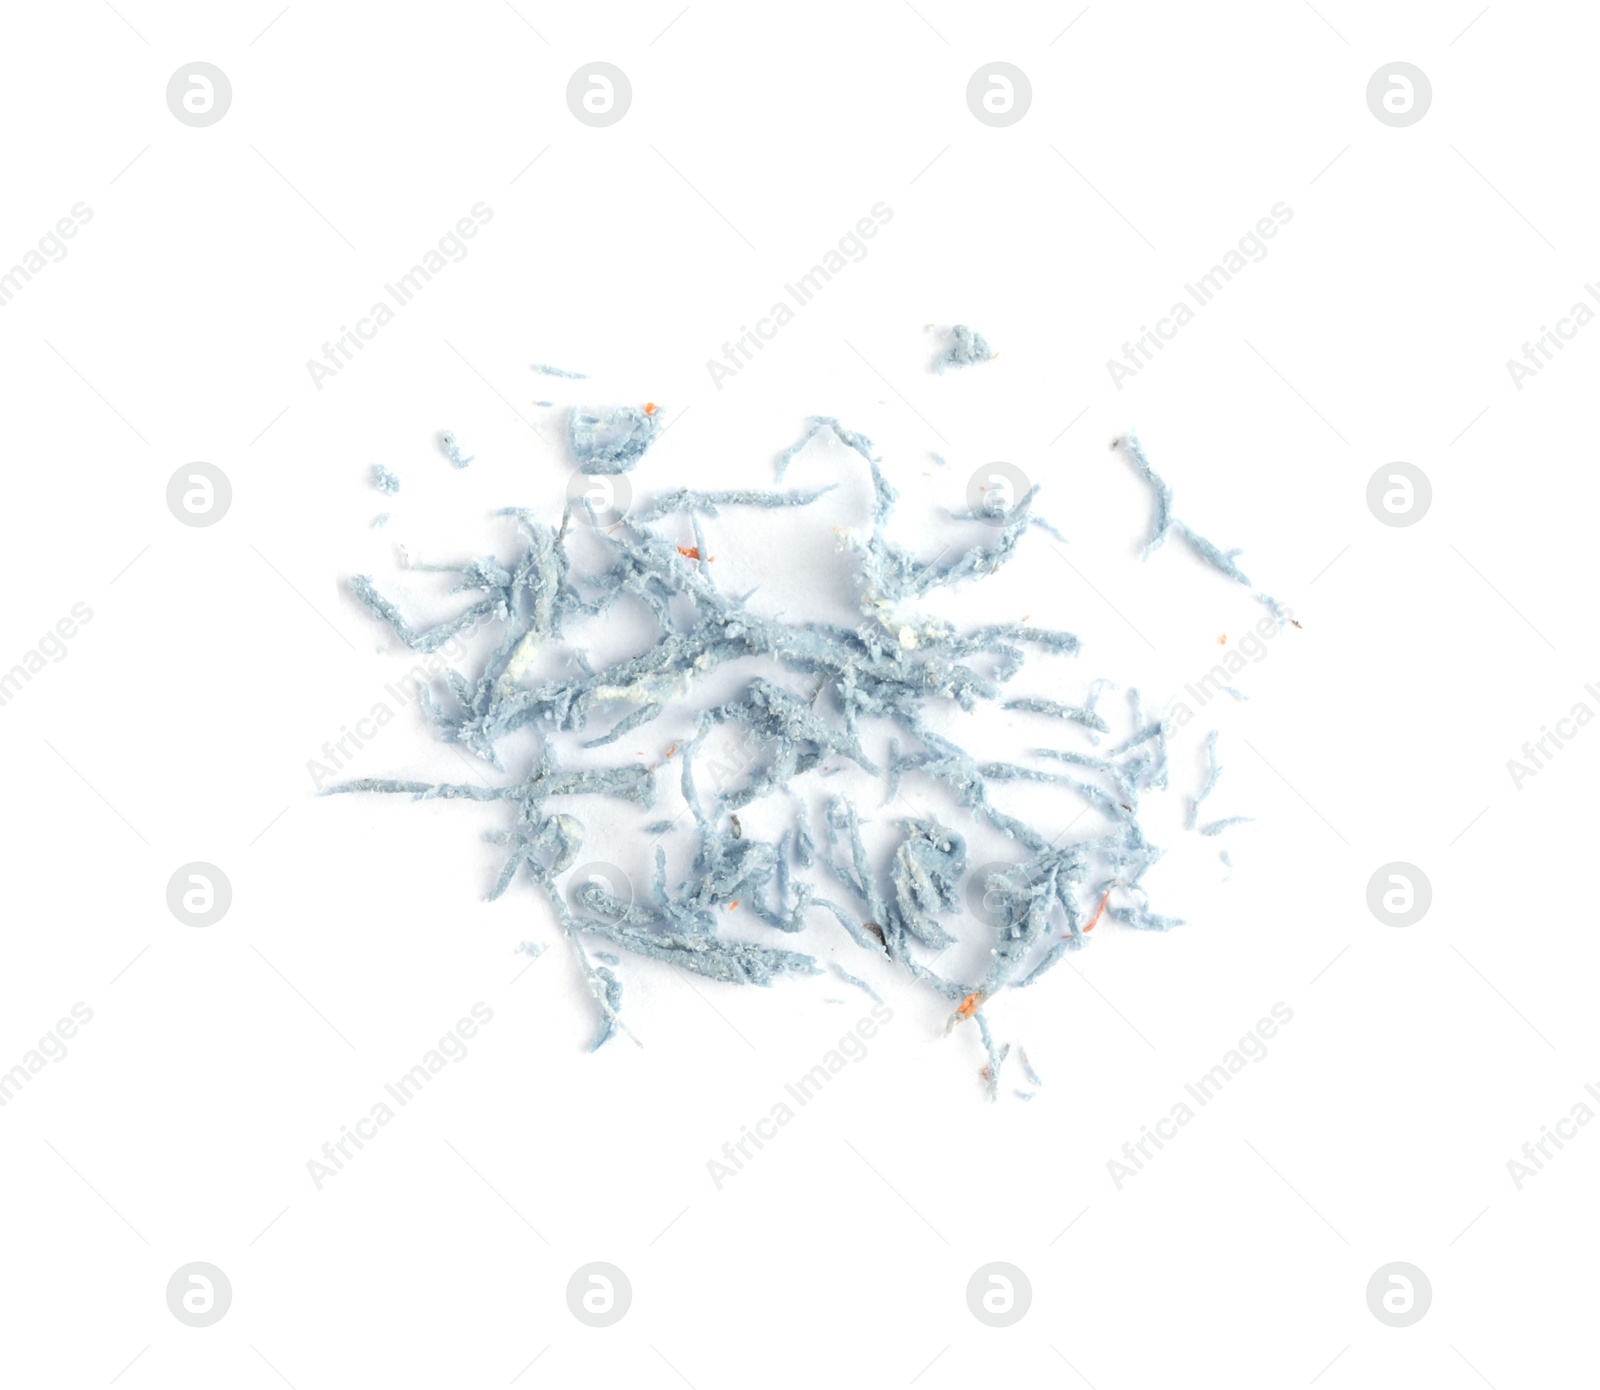 Photo of Pile of light blue eraser crumbs on white background, top view